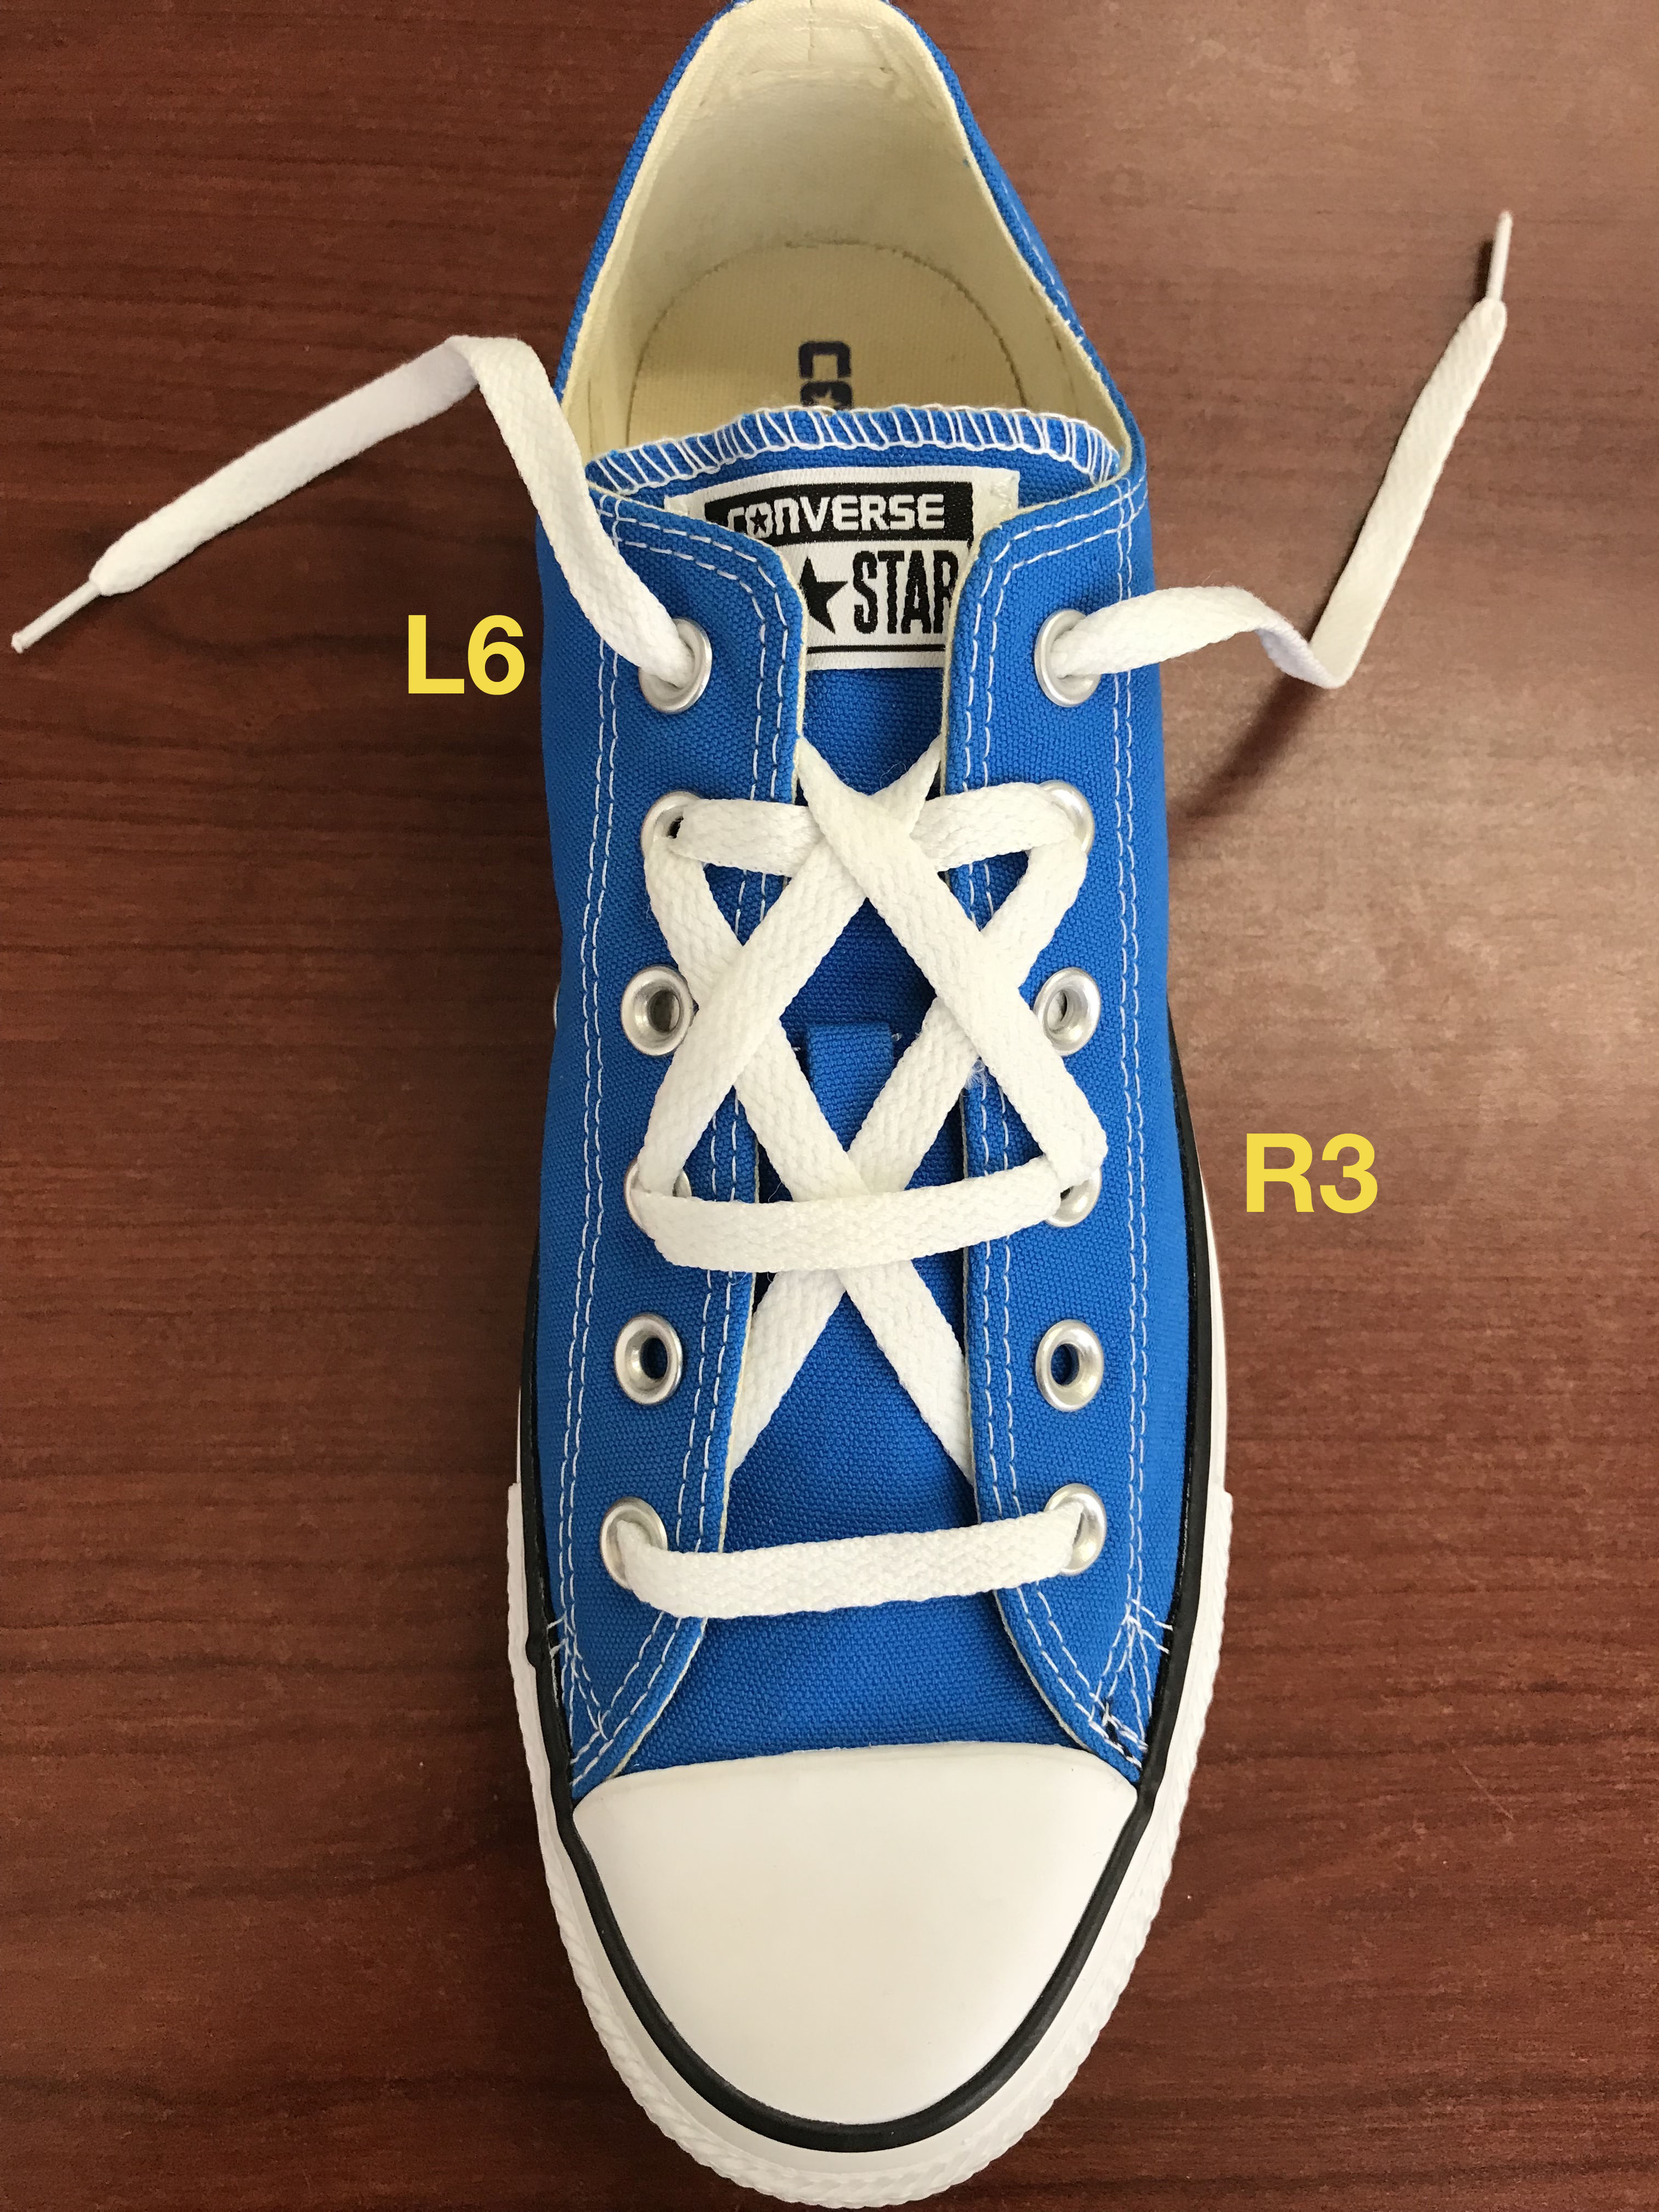 How to Tie Shoelaces Into a Star of David3024 x 4032